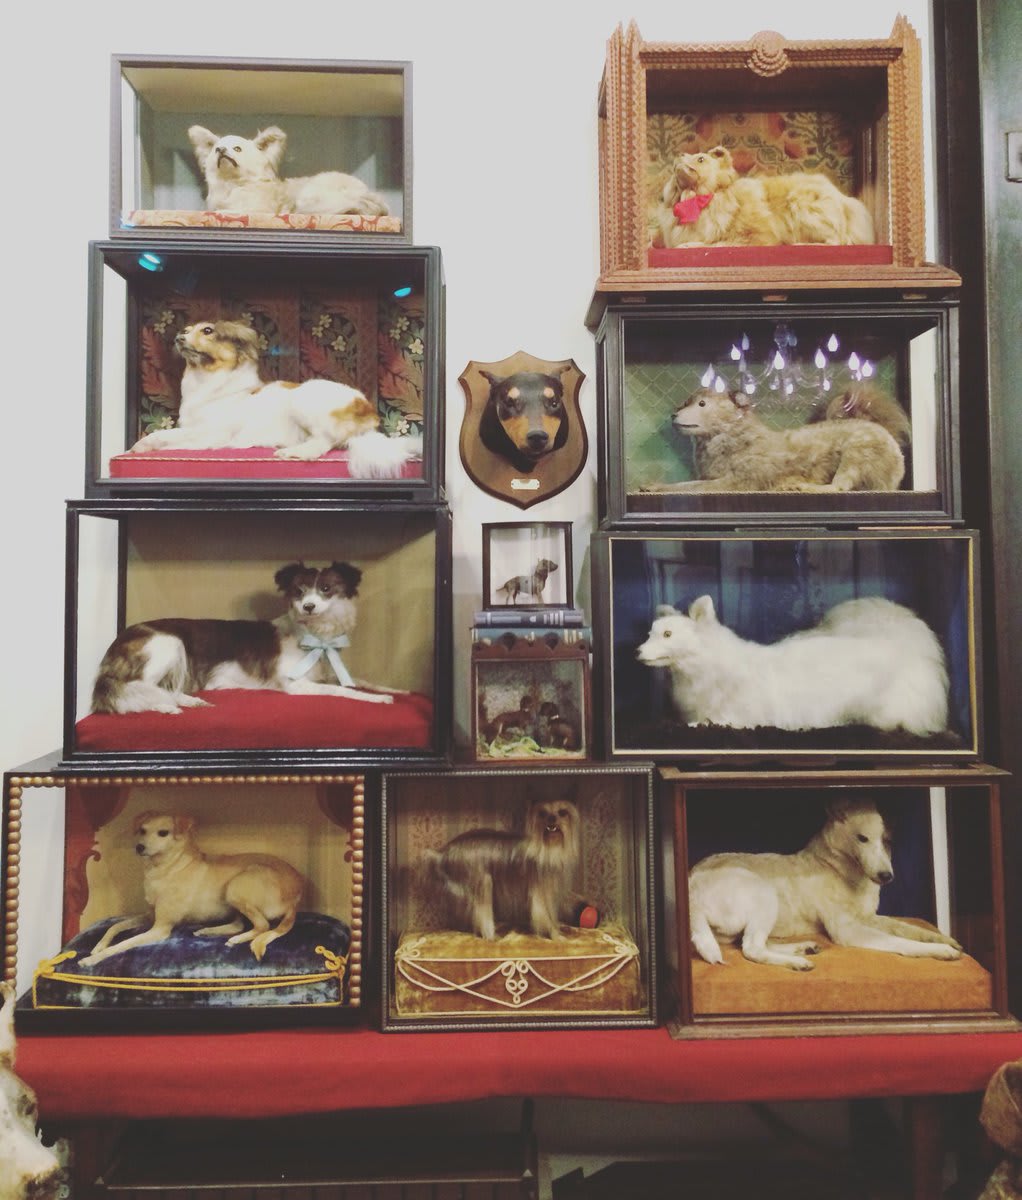 Come see the "wall of pet dogs" in J D Powe's Taxidermy: Art, Science and Immortality Exhibition now on view at MAM!